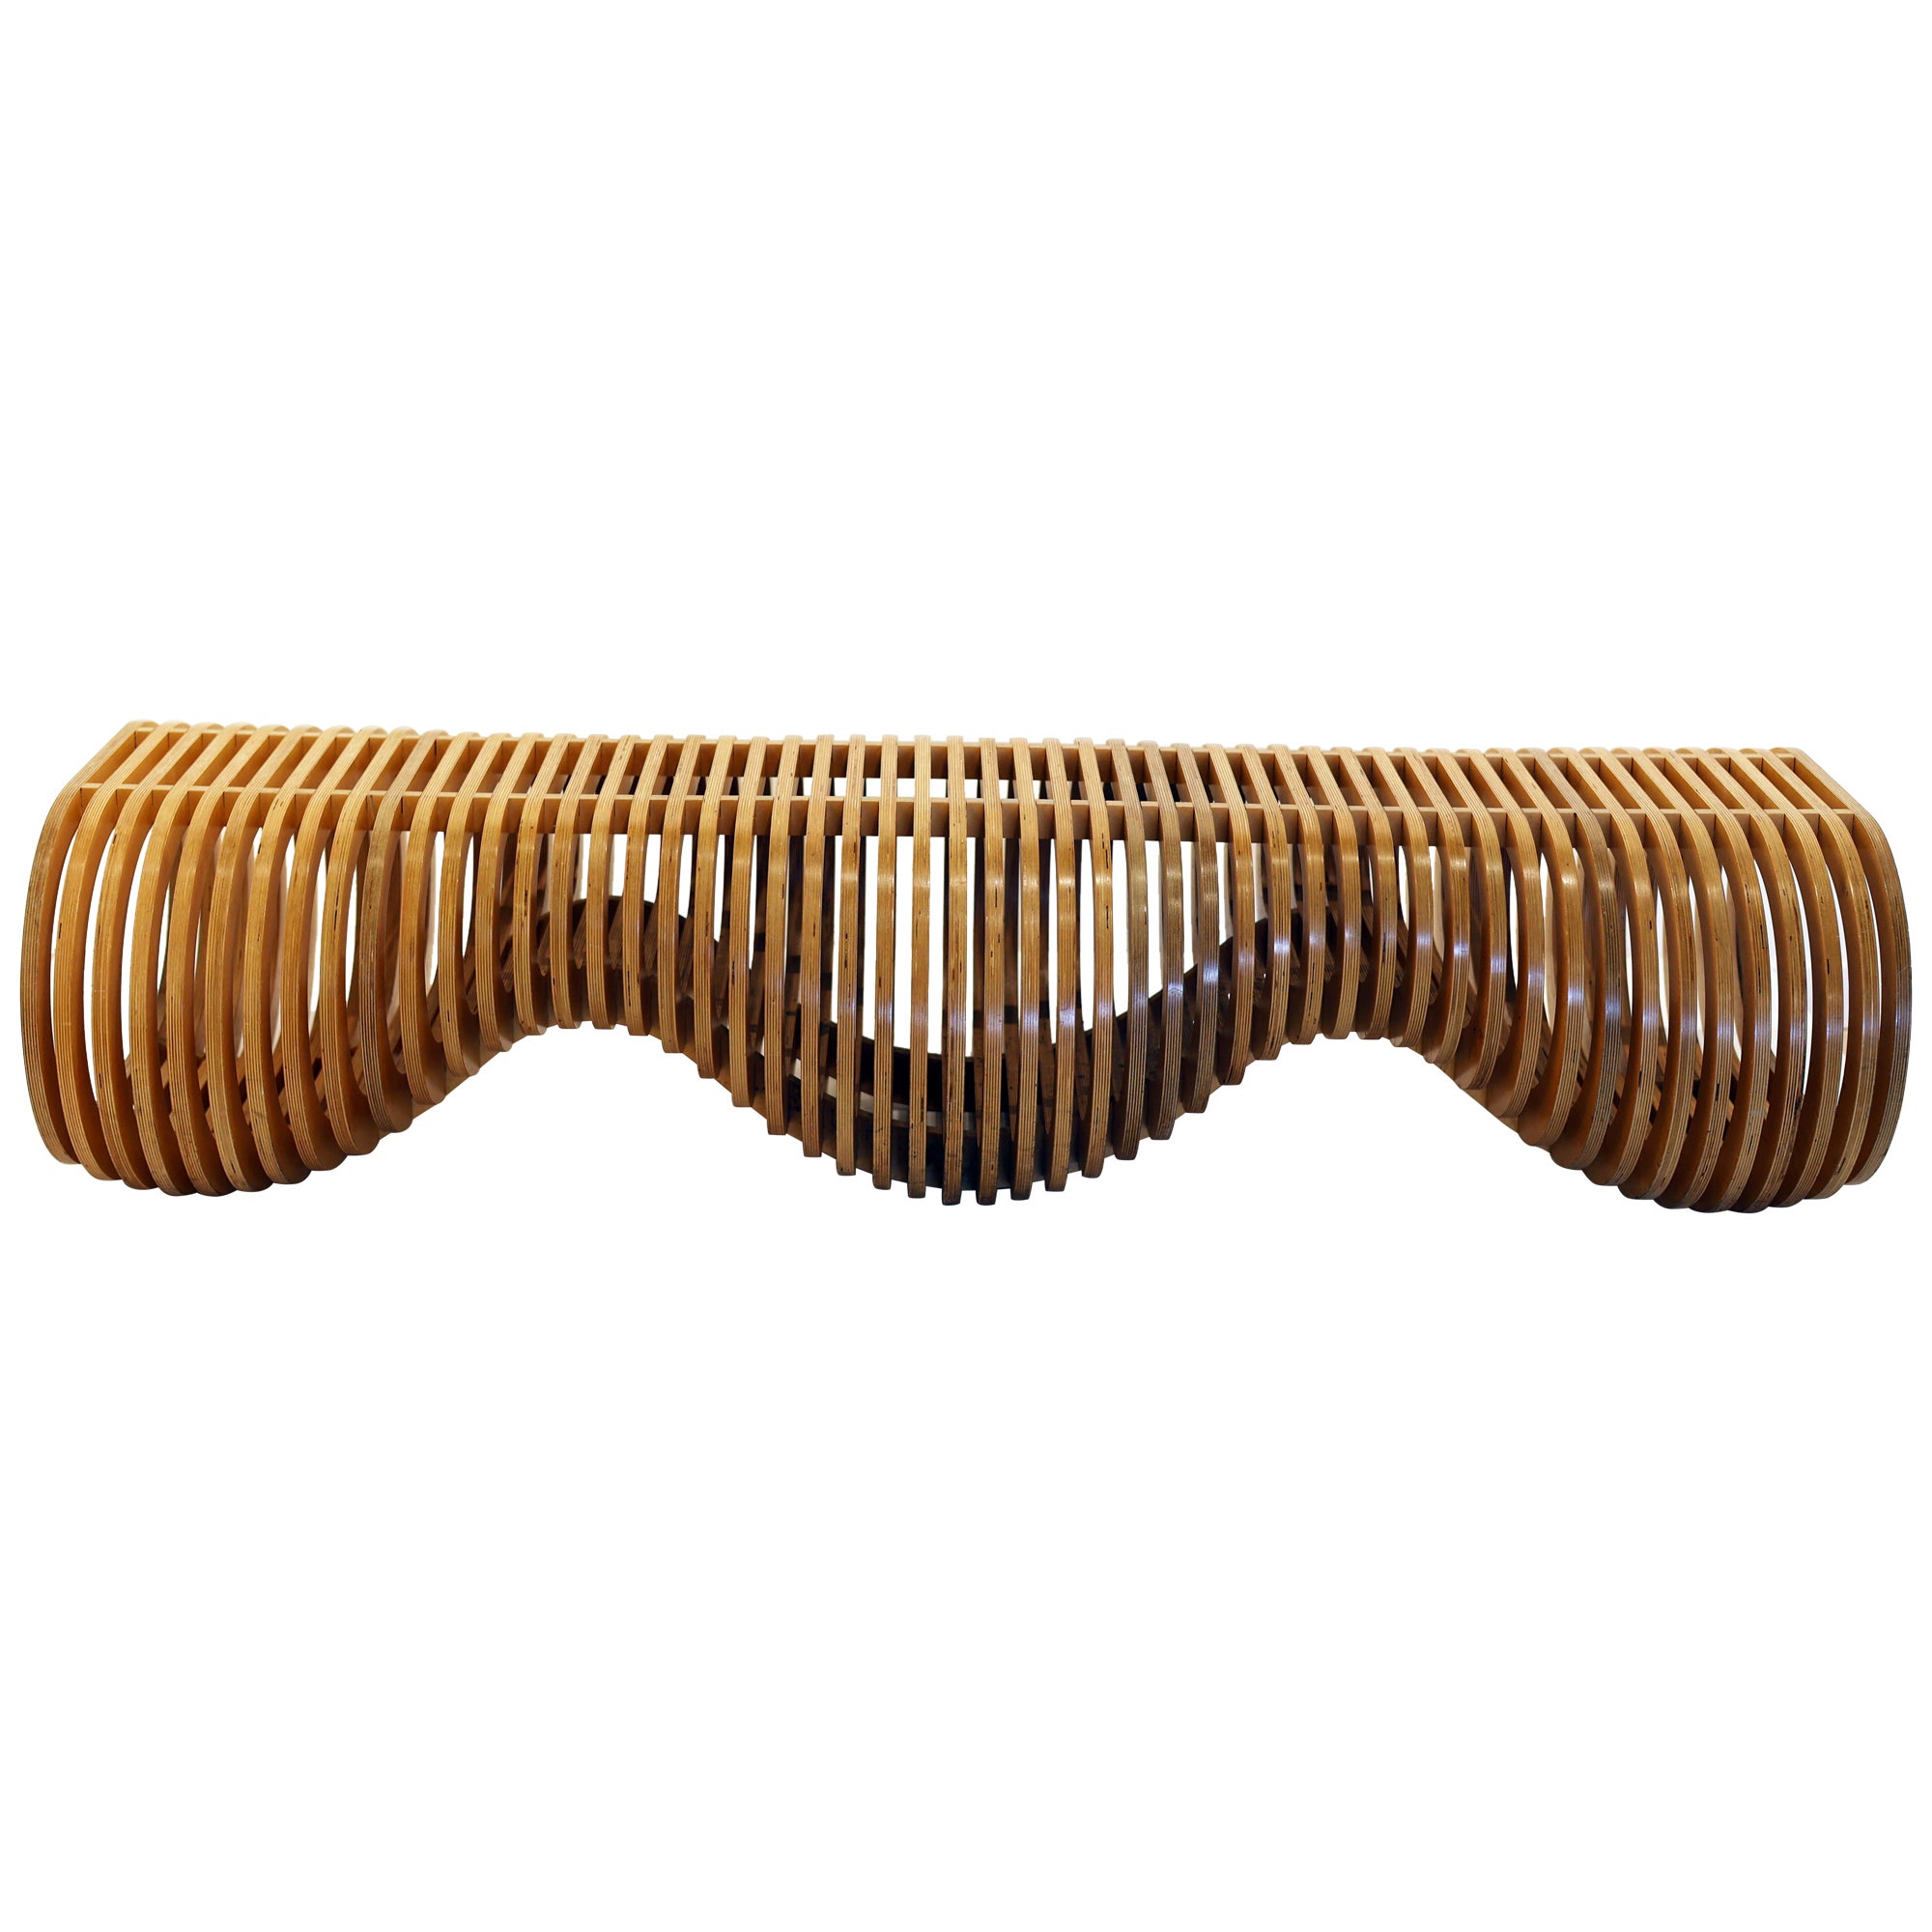 "Infinity Bench" by Carl Frederik Svensted for Lerival For Sale